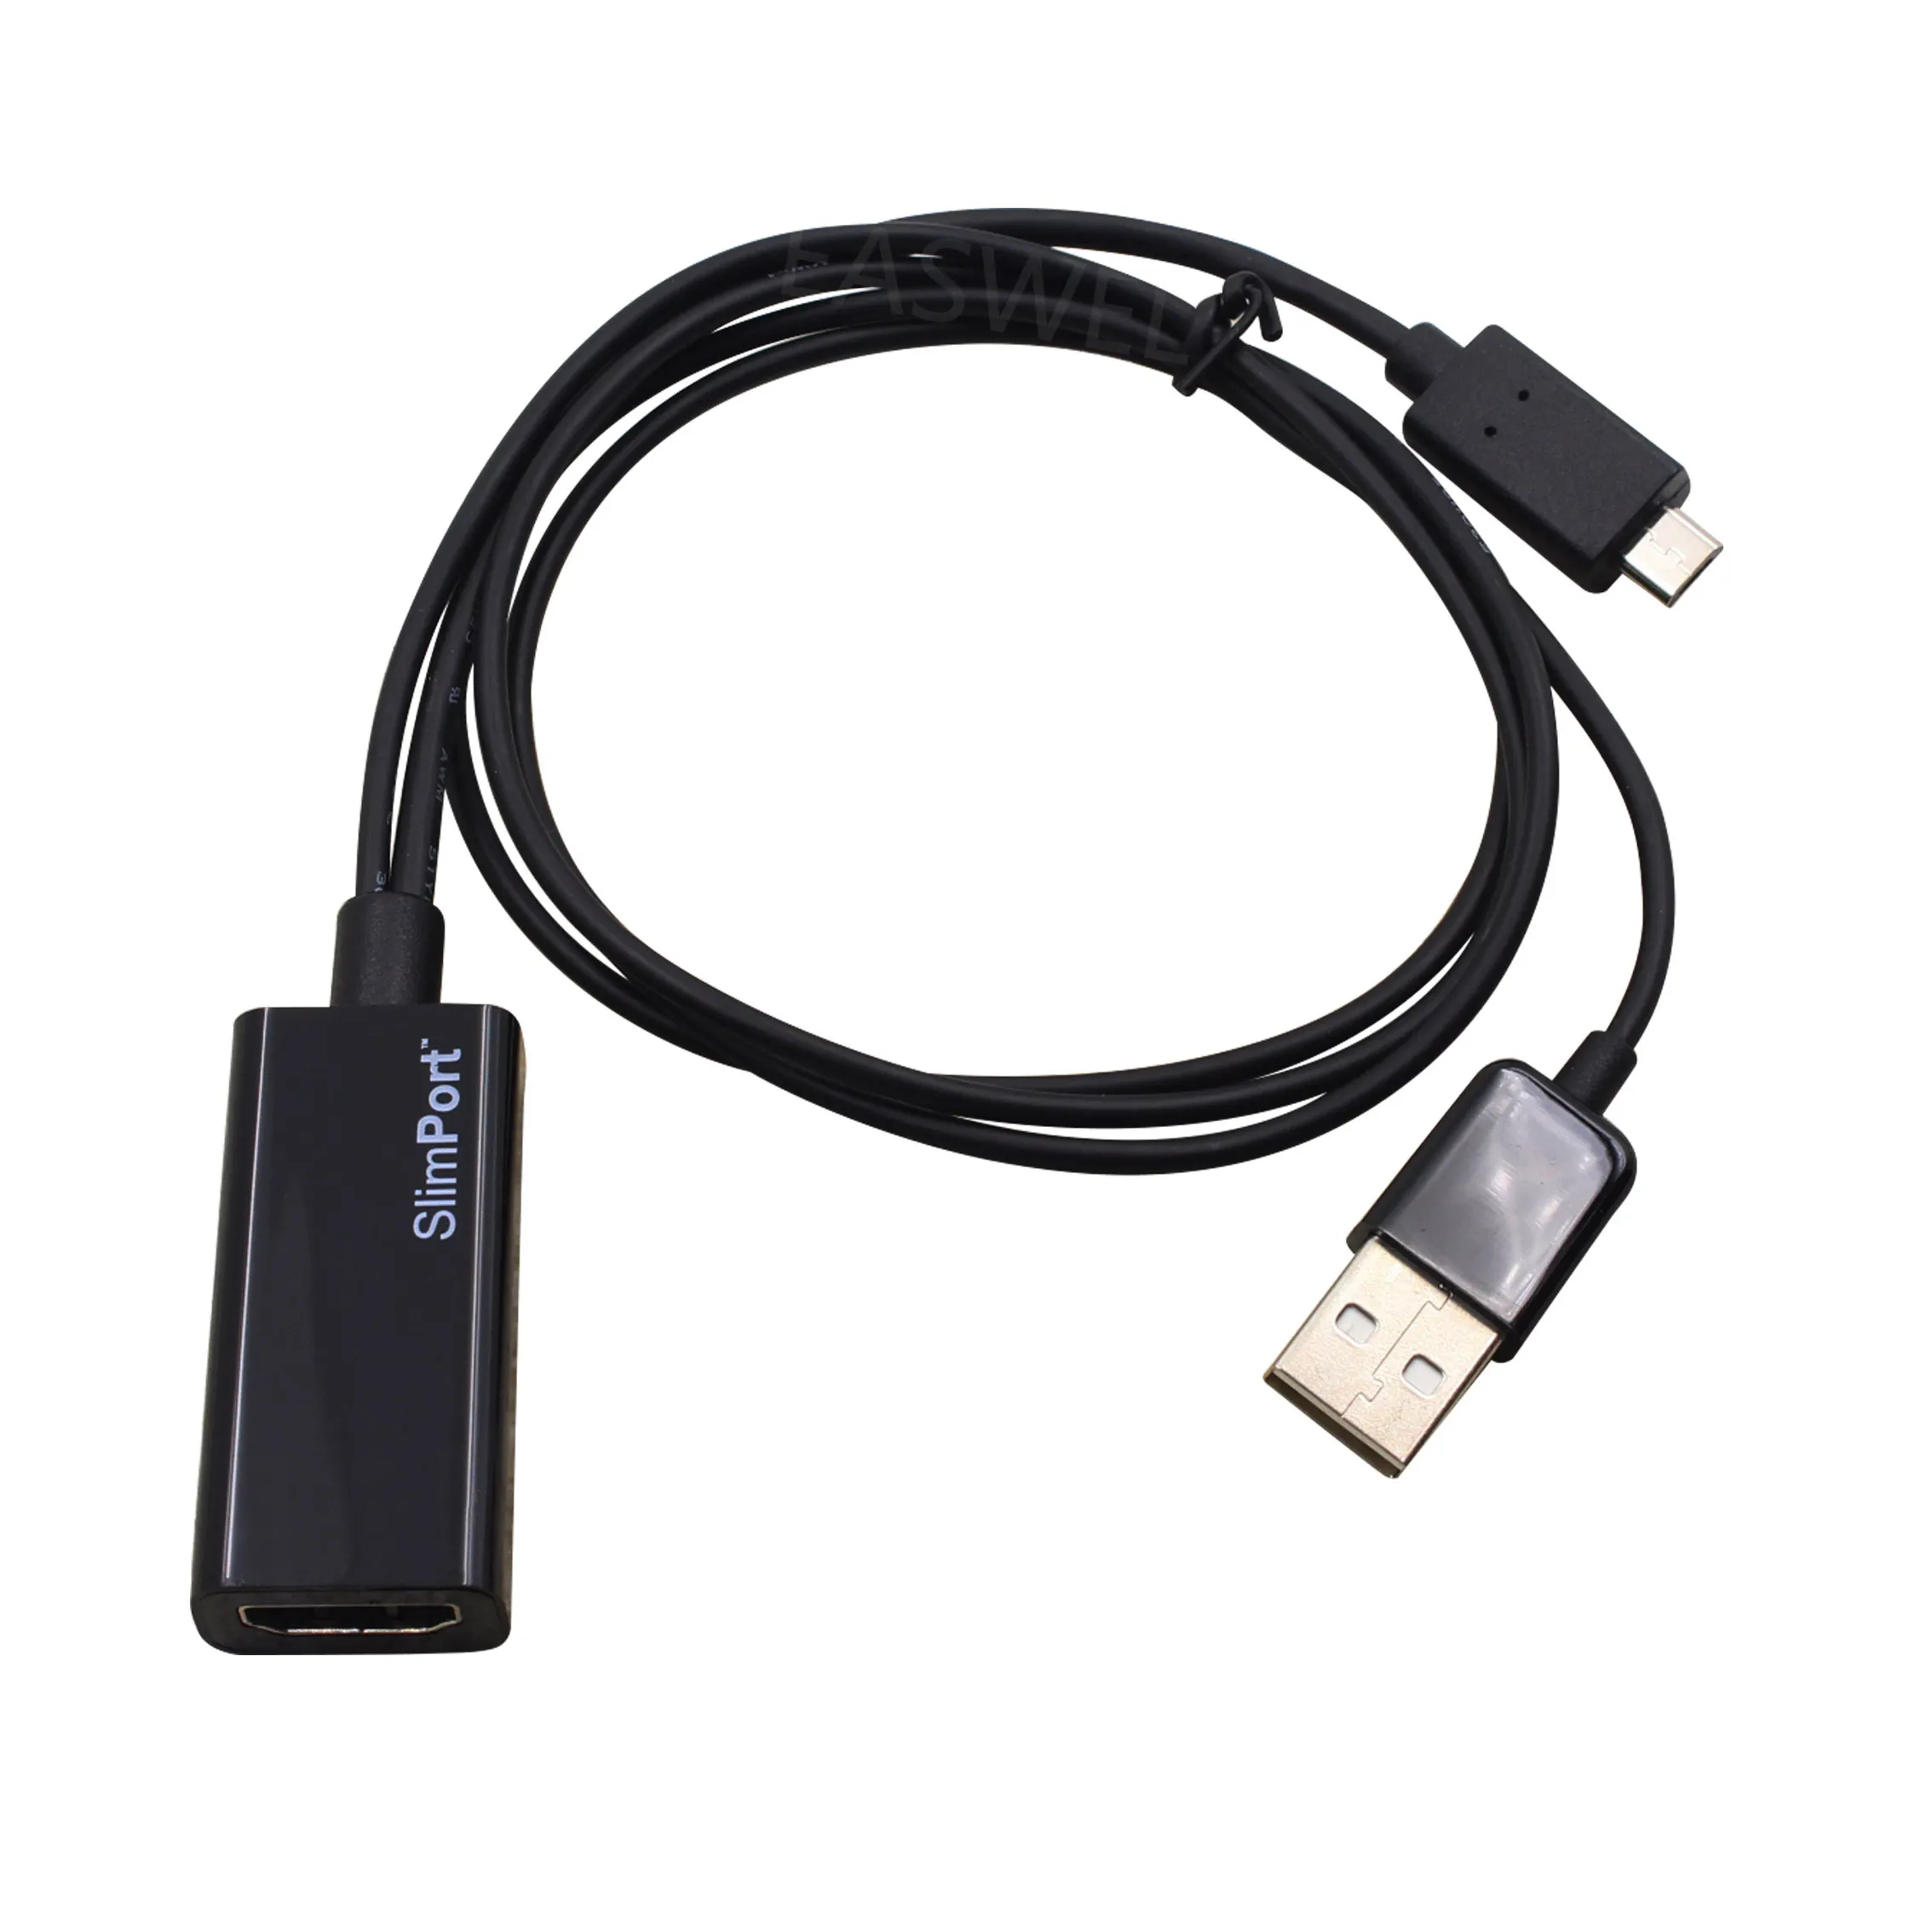 

SlimPort MYDP to HDMI MHL HDTV Adapter For Google Nexus 4 5 7 for LG G3 G Pro G2 G Pro Flex With USB